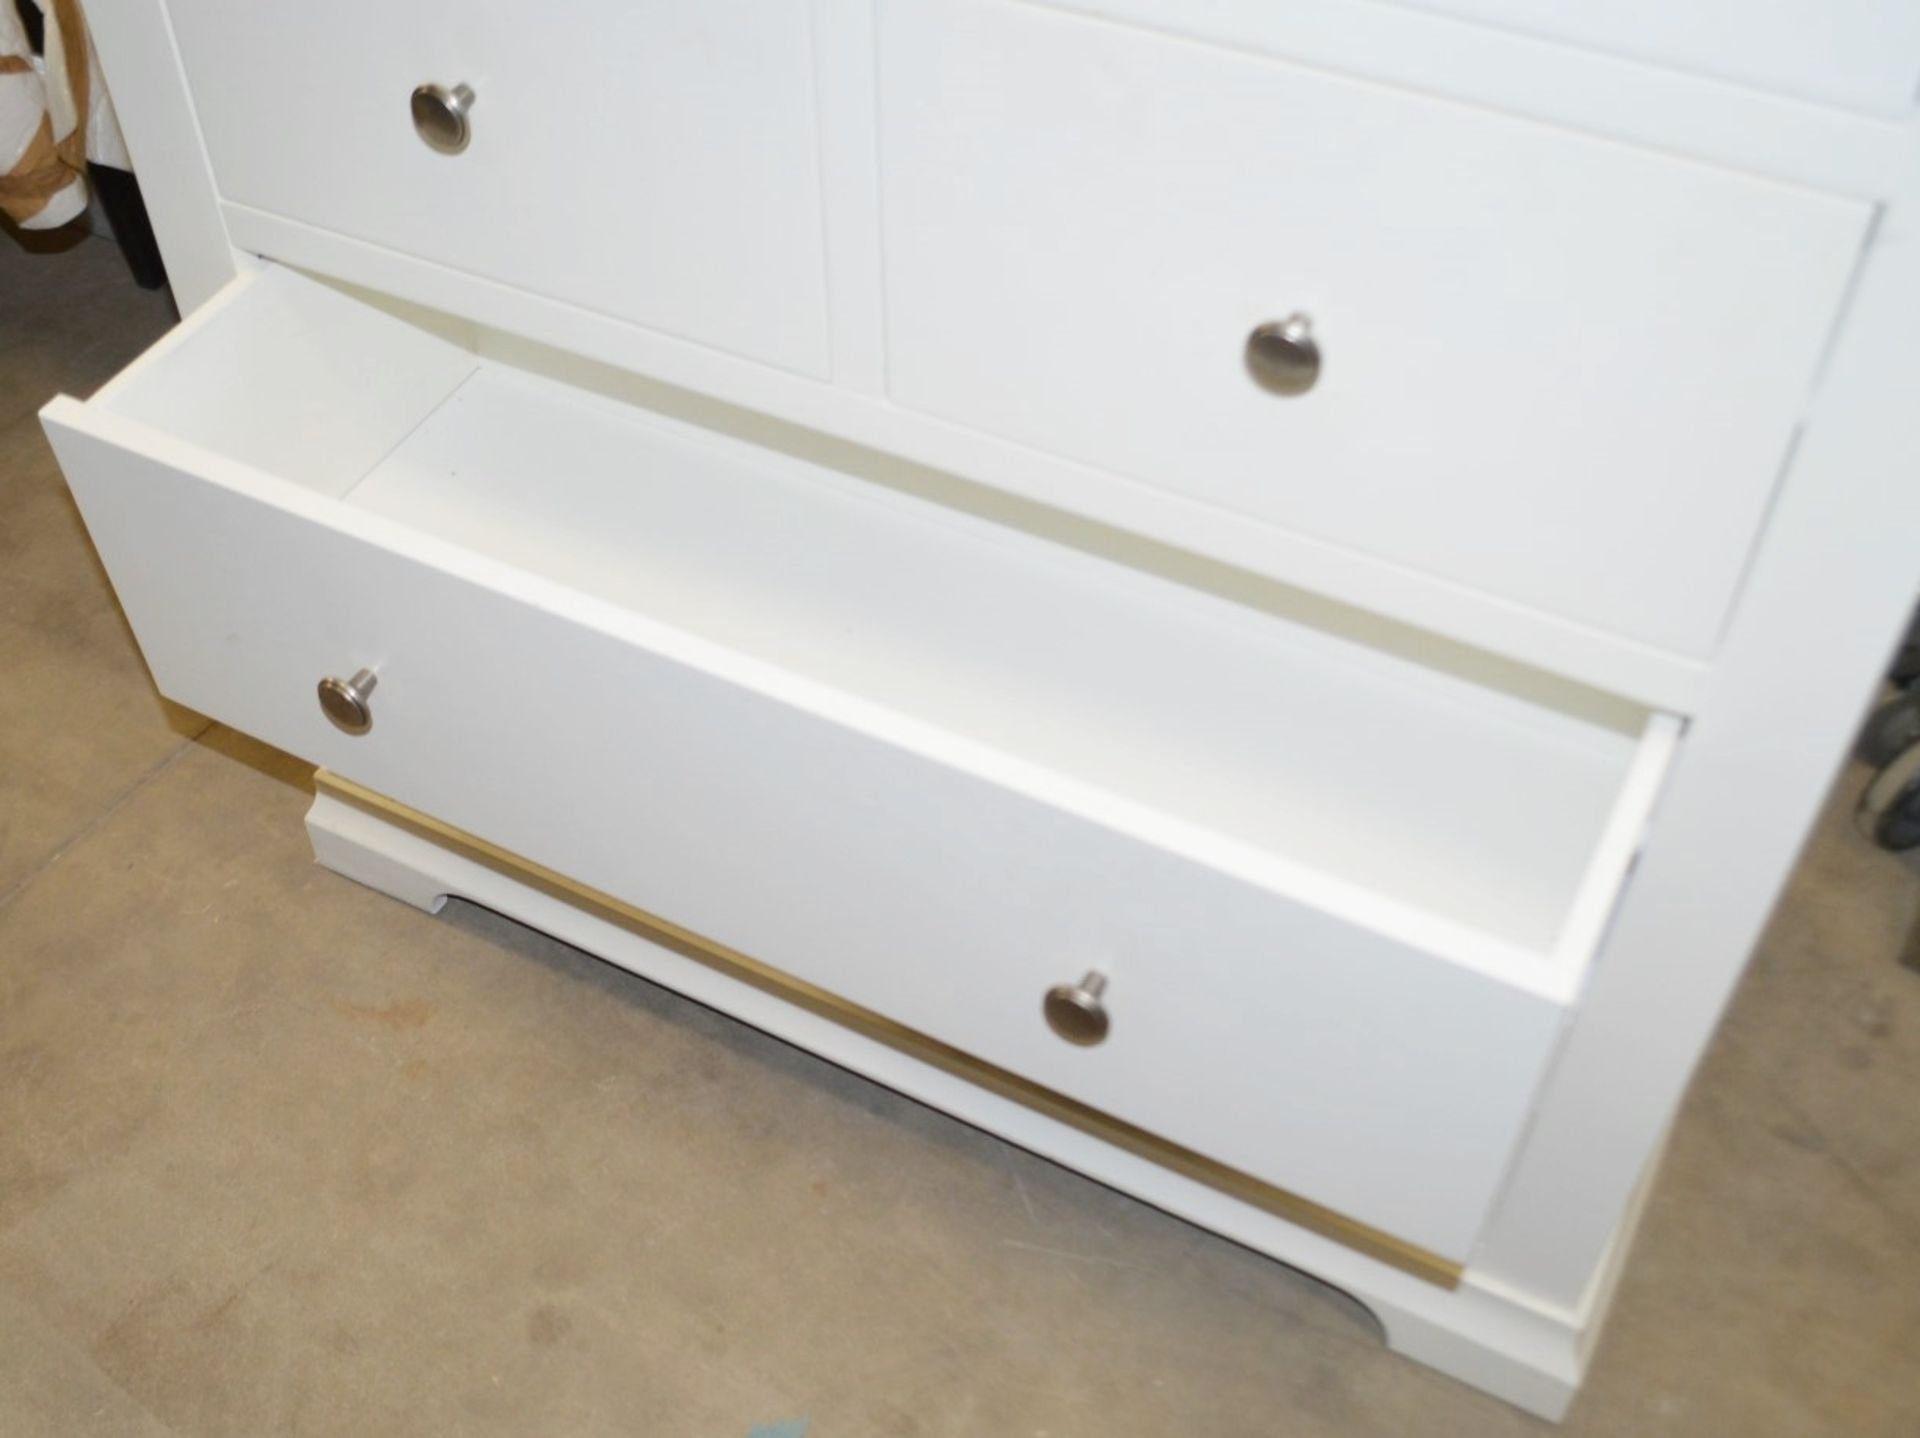 1 x Tall Drawer Unit In Cream - From An Exclusive Property In Hale Barns - Dimensions: 105 x 42 x - Image 5 of 6